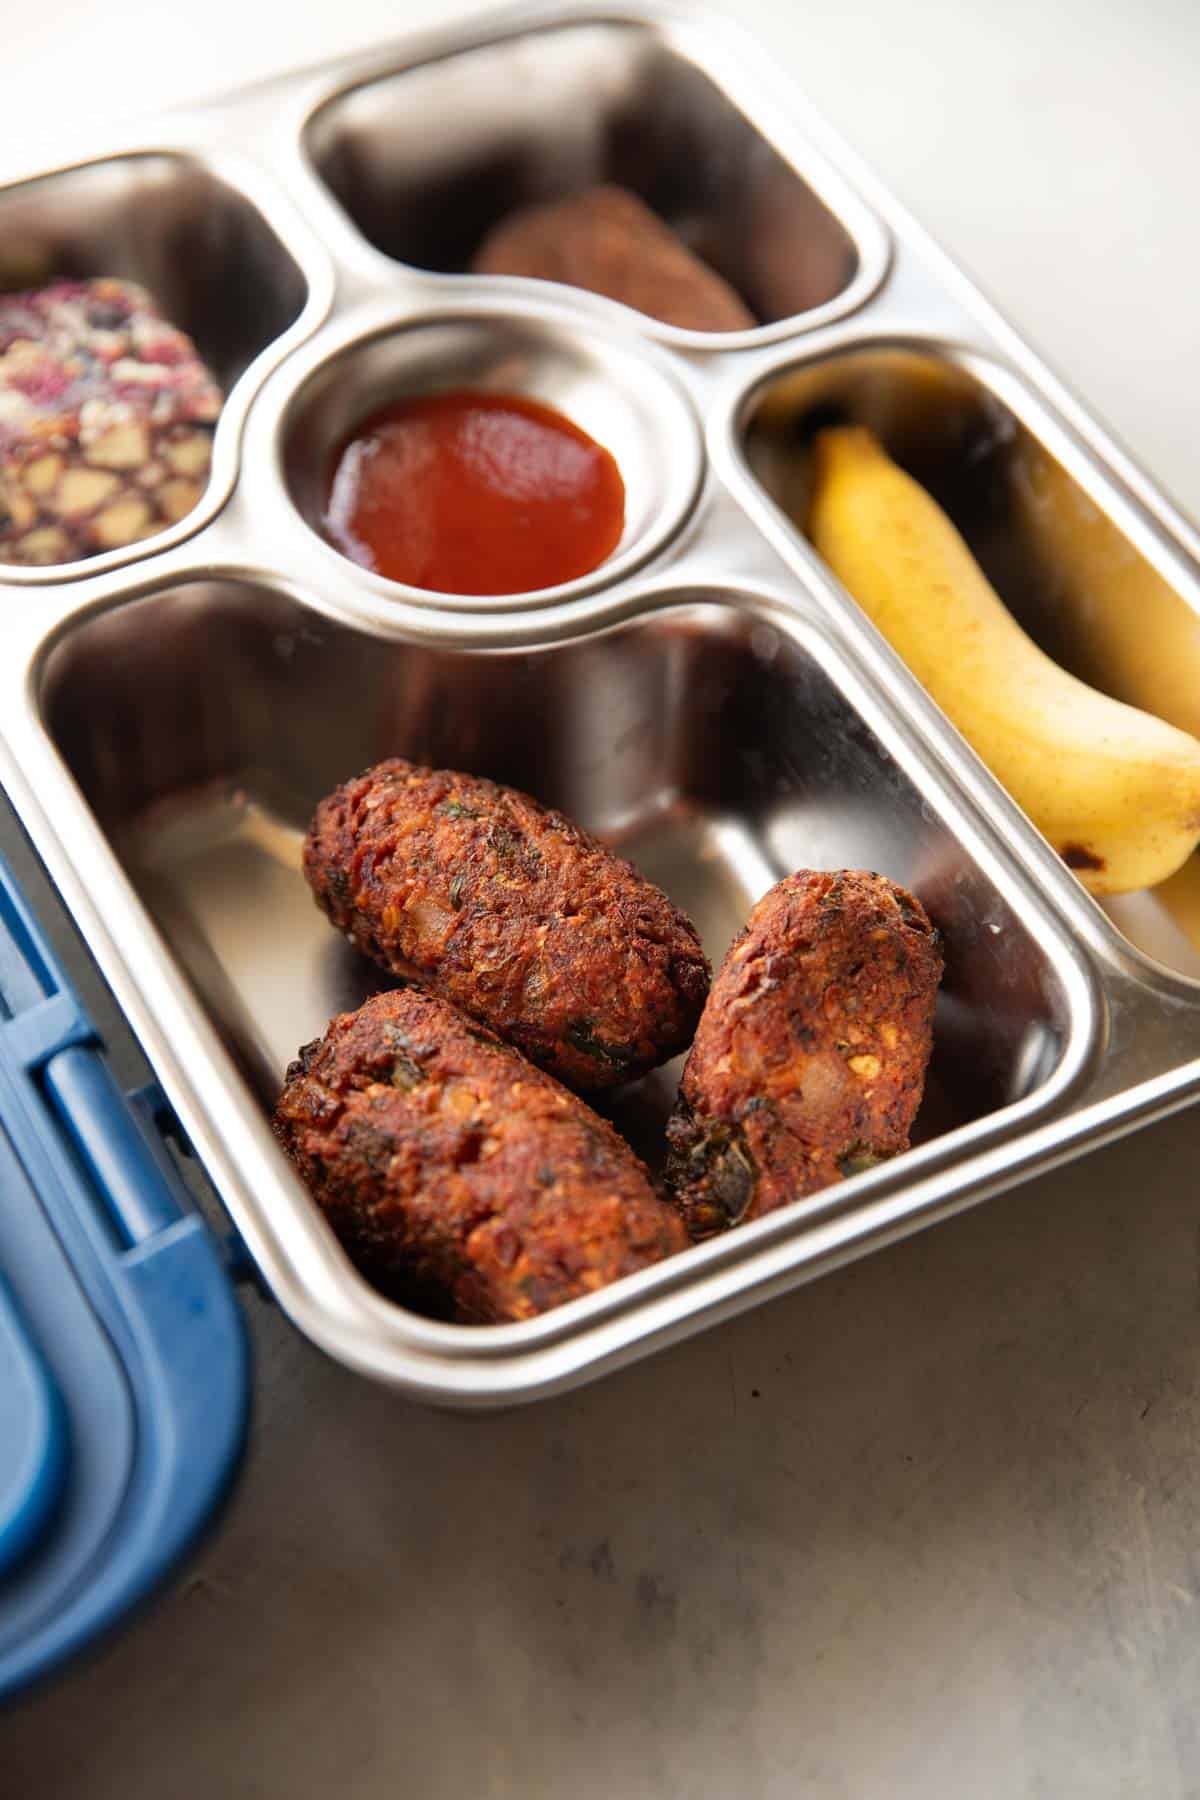 A picture of a lunch box with a sweet, ketchup, banana and a close up of the sprouts cutlet